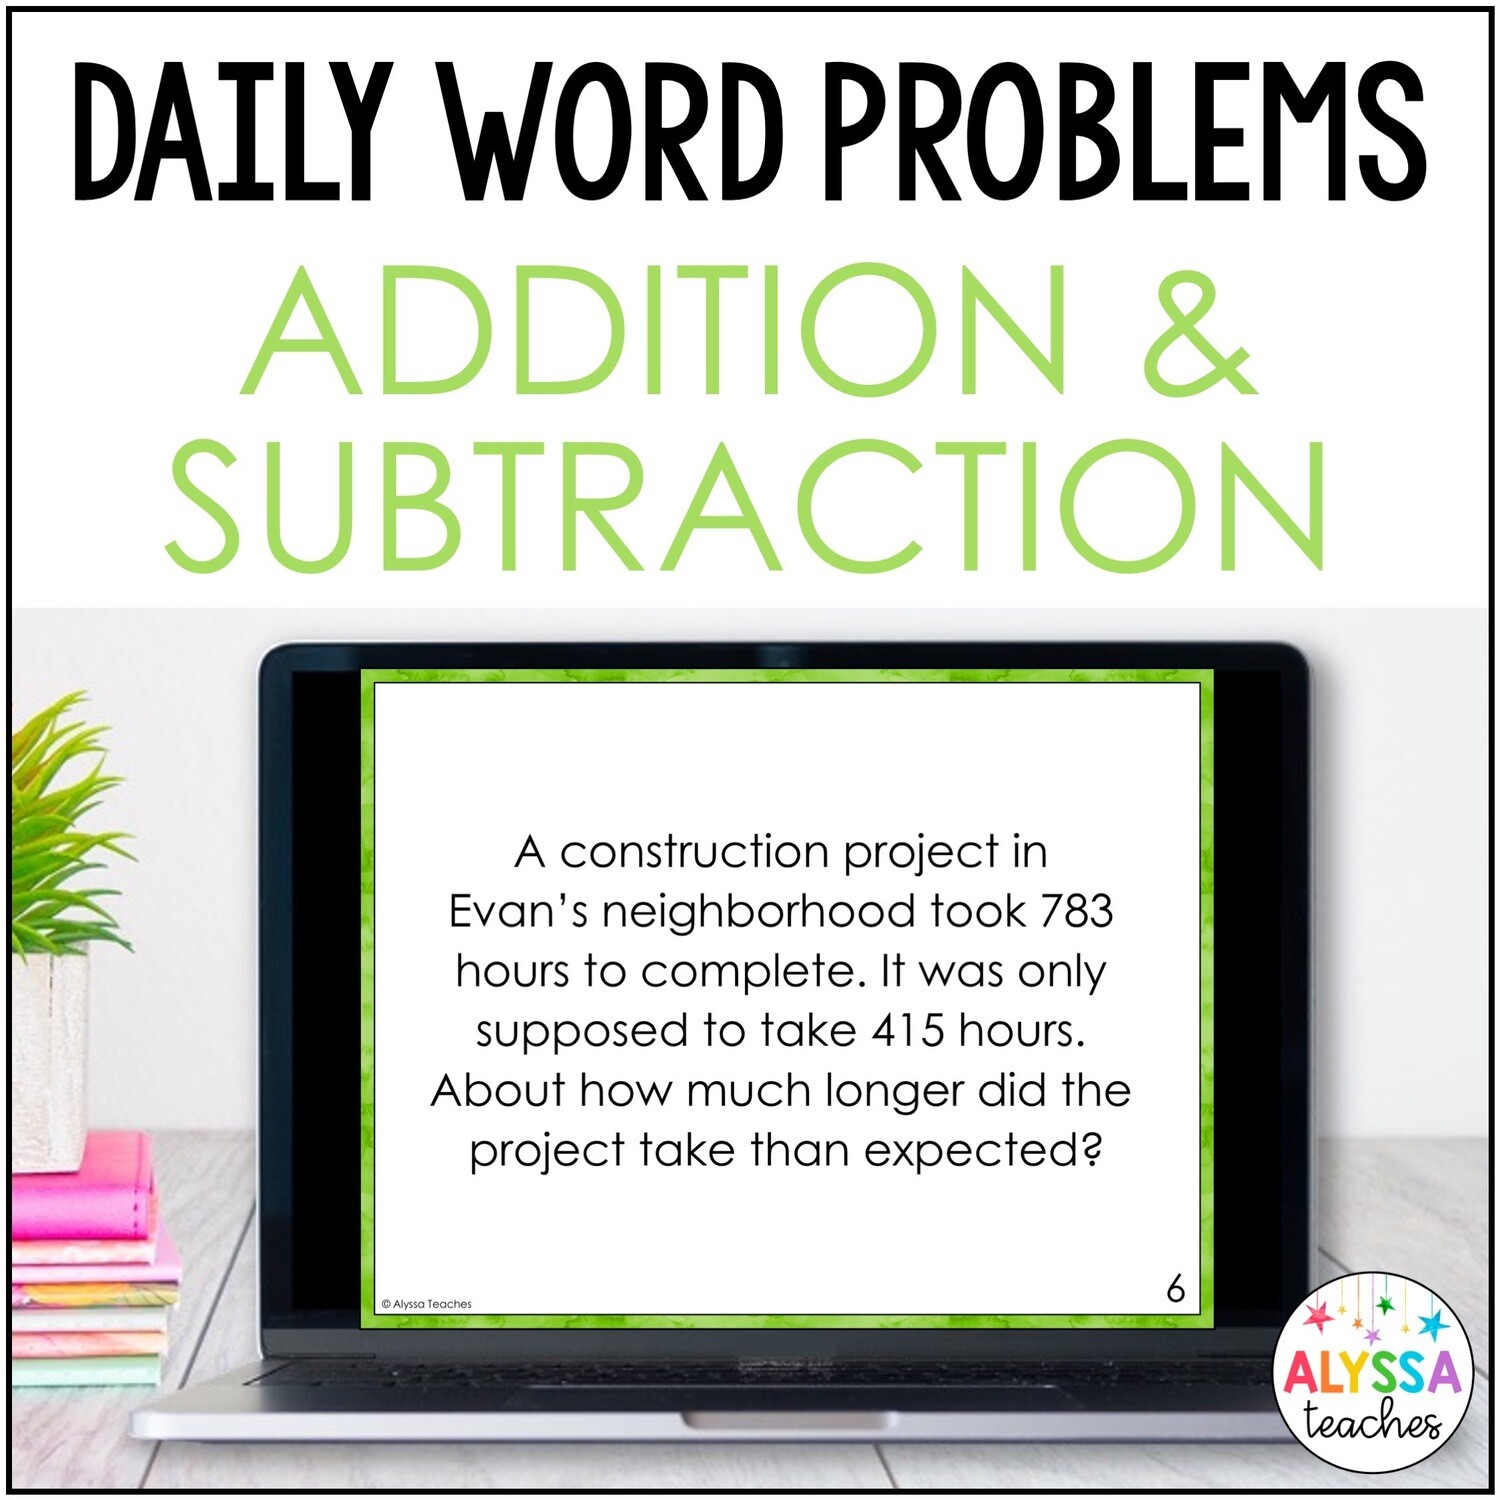 Addition and Subtraction Word Problems for Daily Math Review